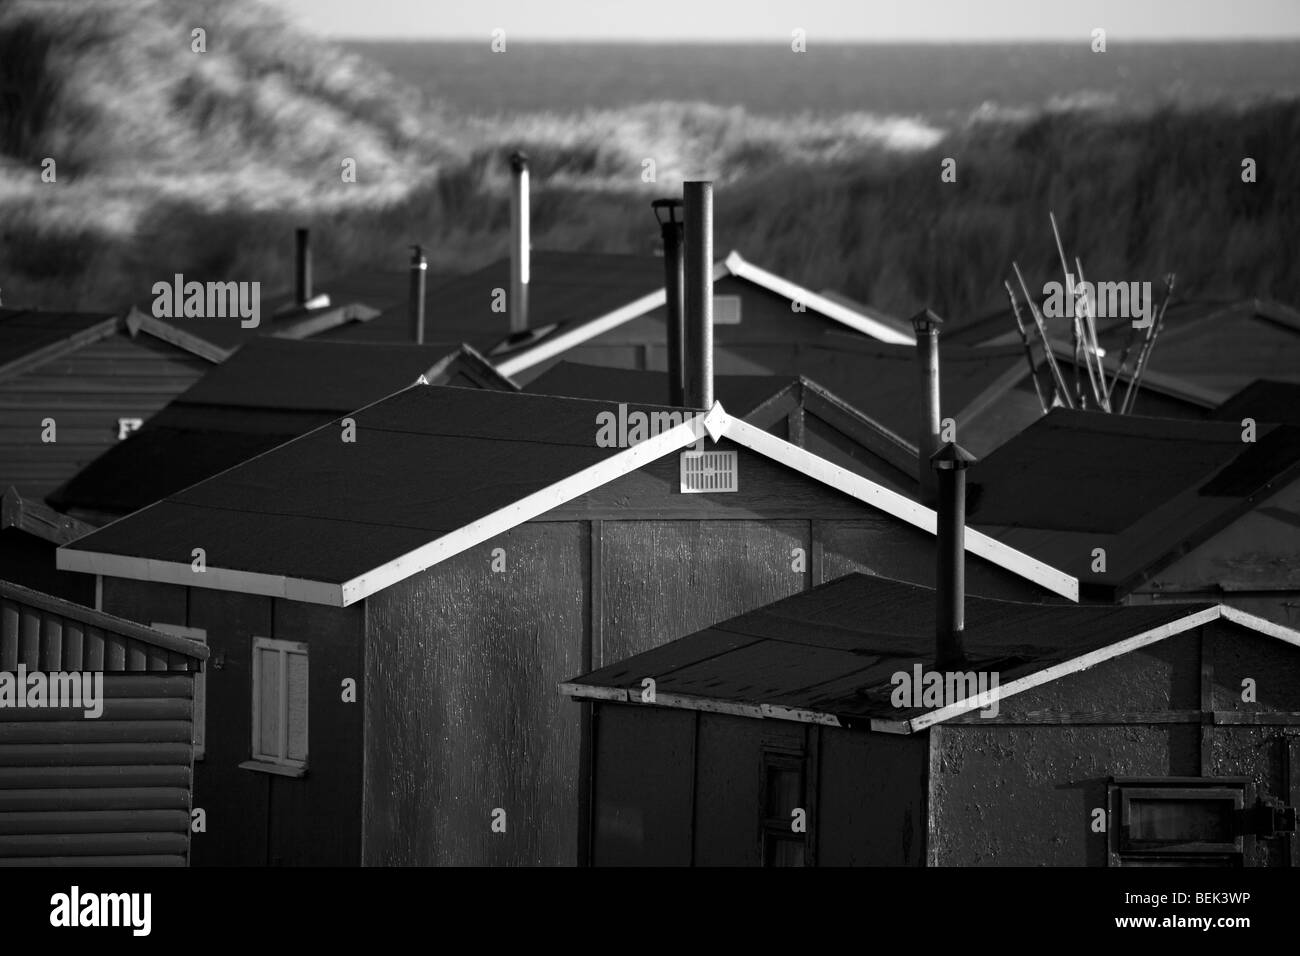 Several Tarpaulin roofed Fisherman's huts with chimneys; A hundred “South Gare Fishermen’s Association” cabins. Multiple sheds with doors & windows Stock Photo